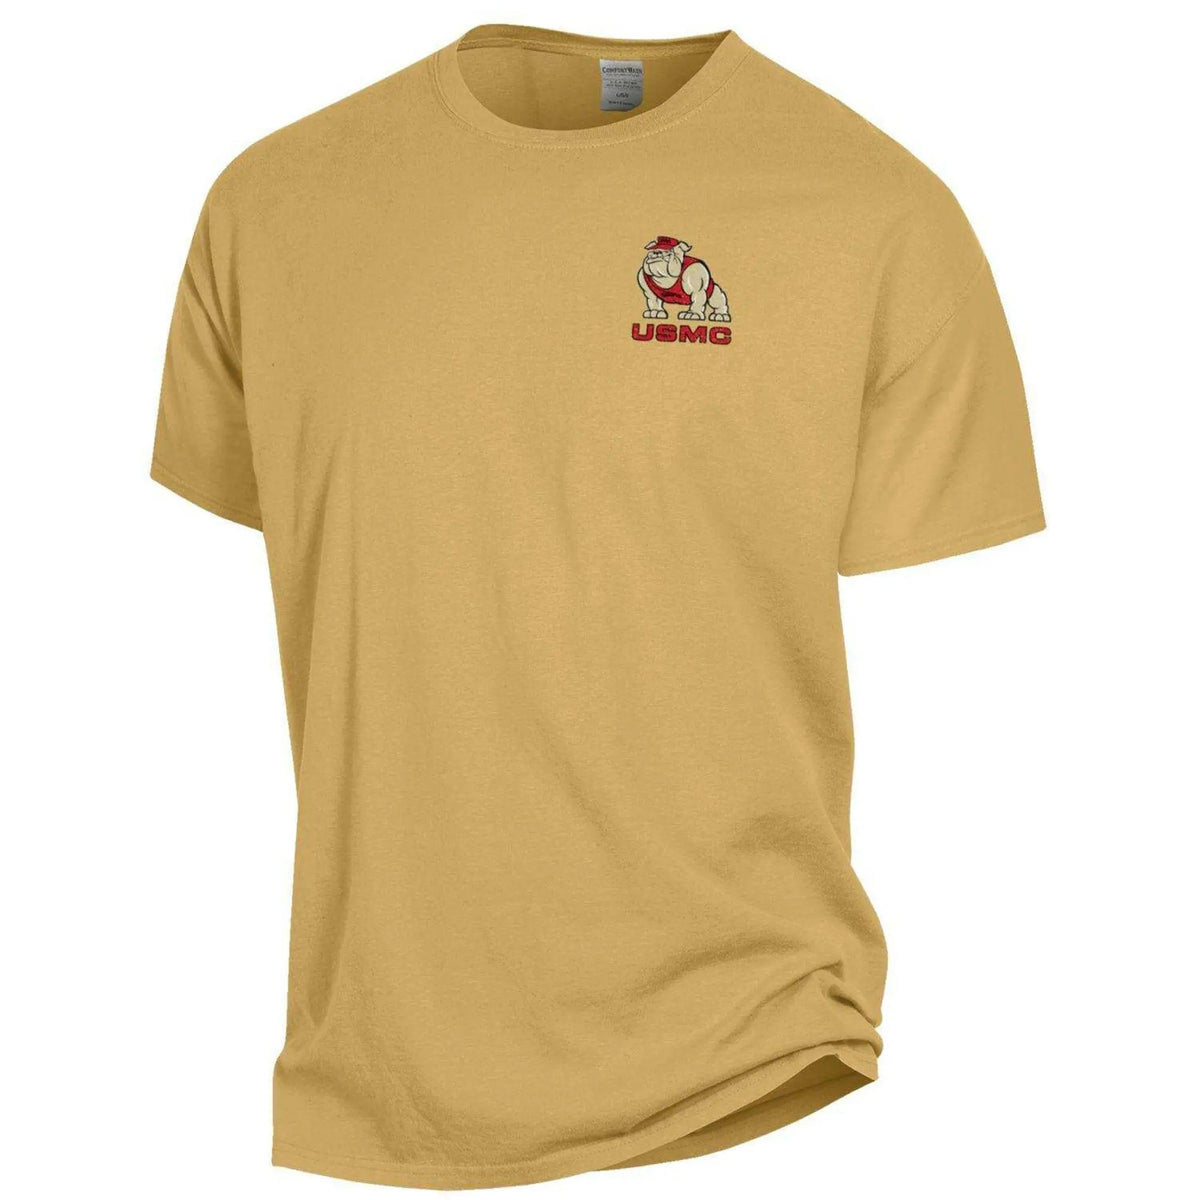 Closeout Comfort Wash Bulldog with Full Back Gold Tee